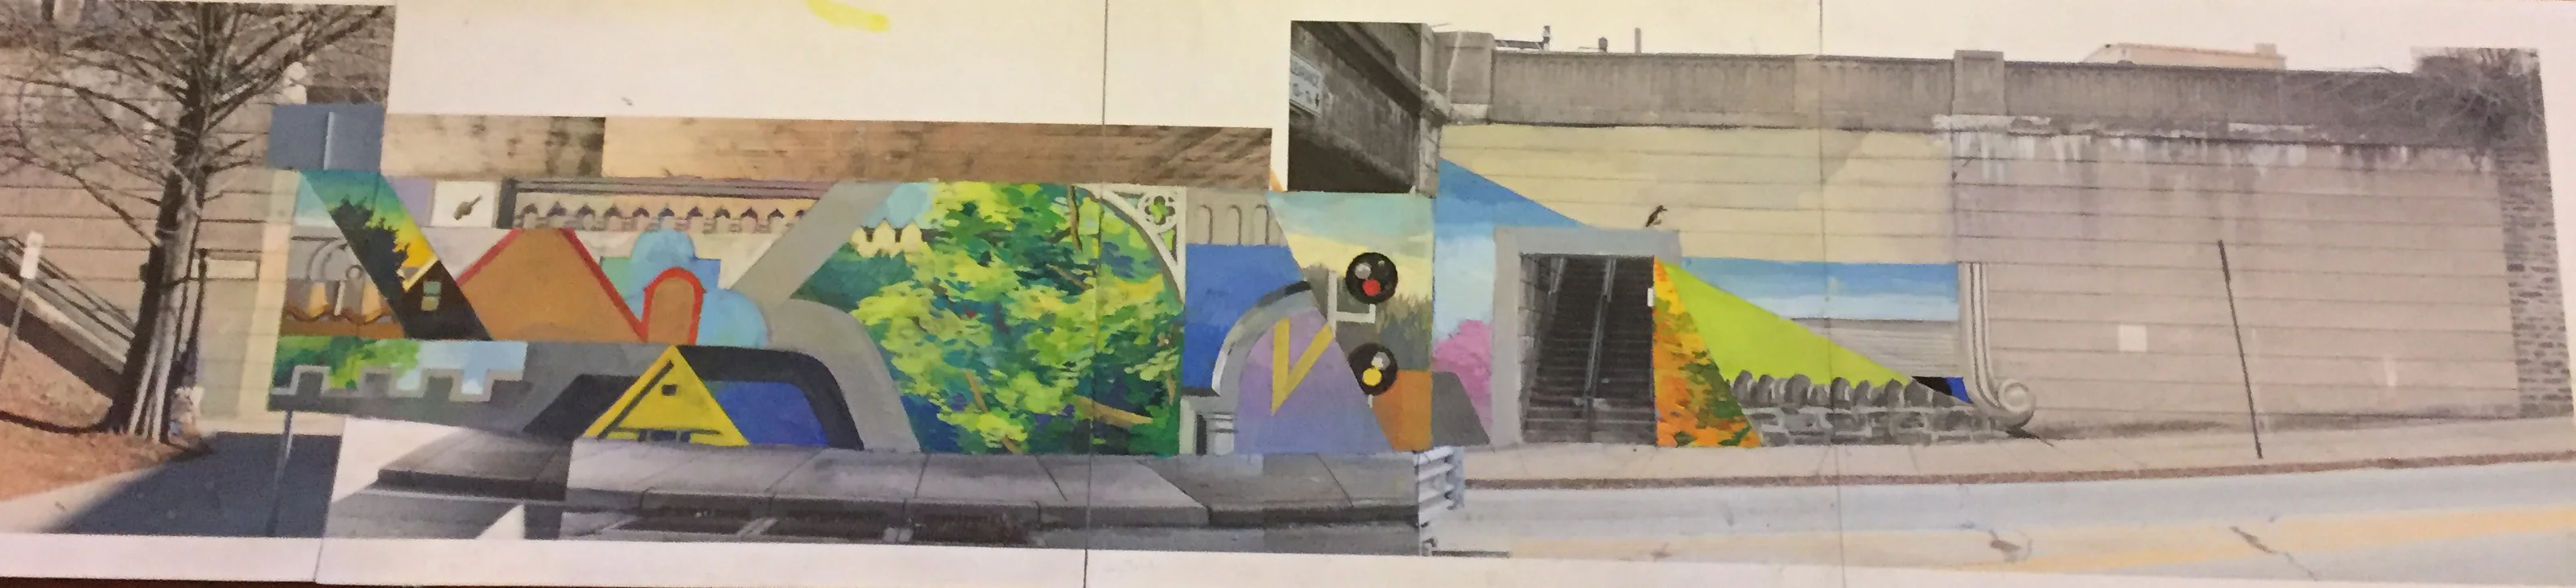 A panoramic view of the painted wall "Glenside Mural"